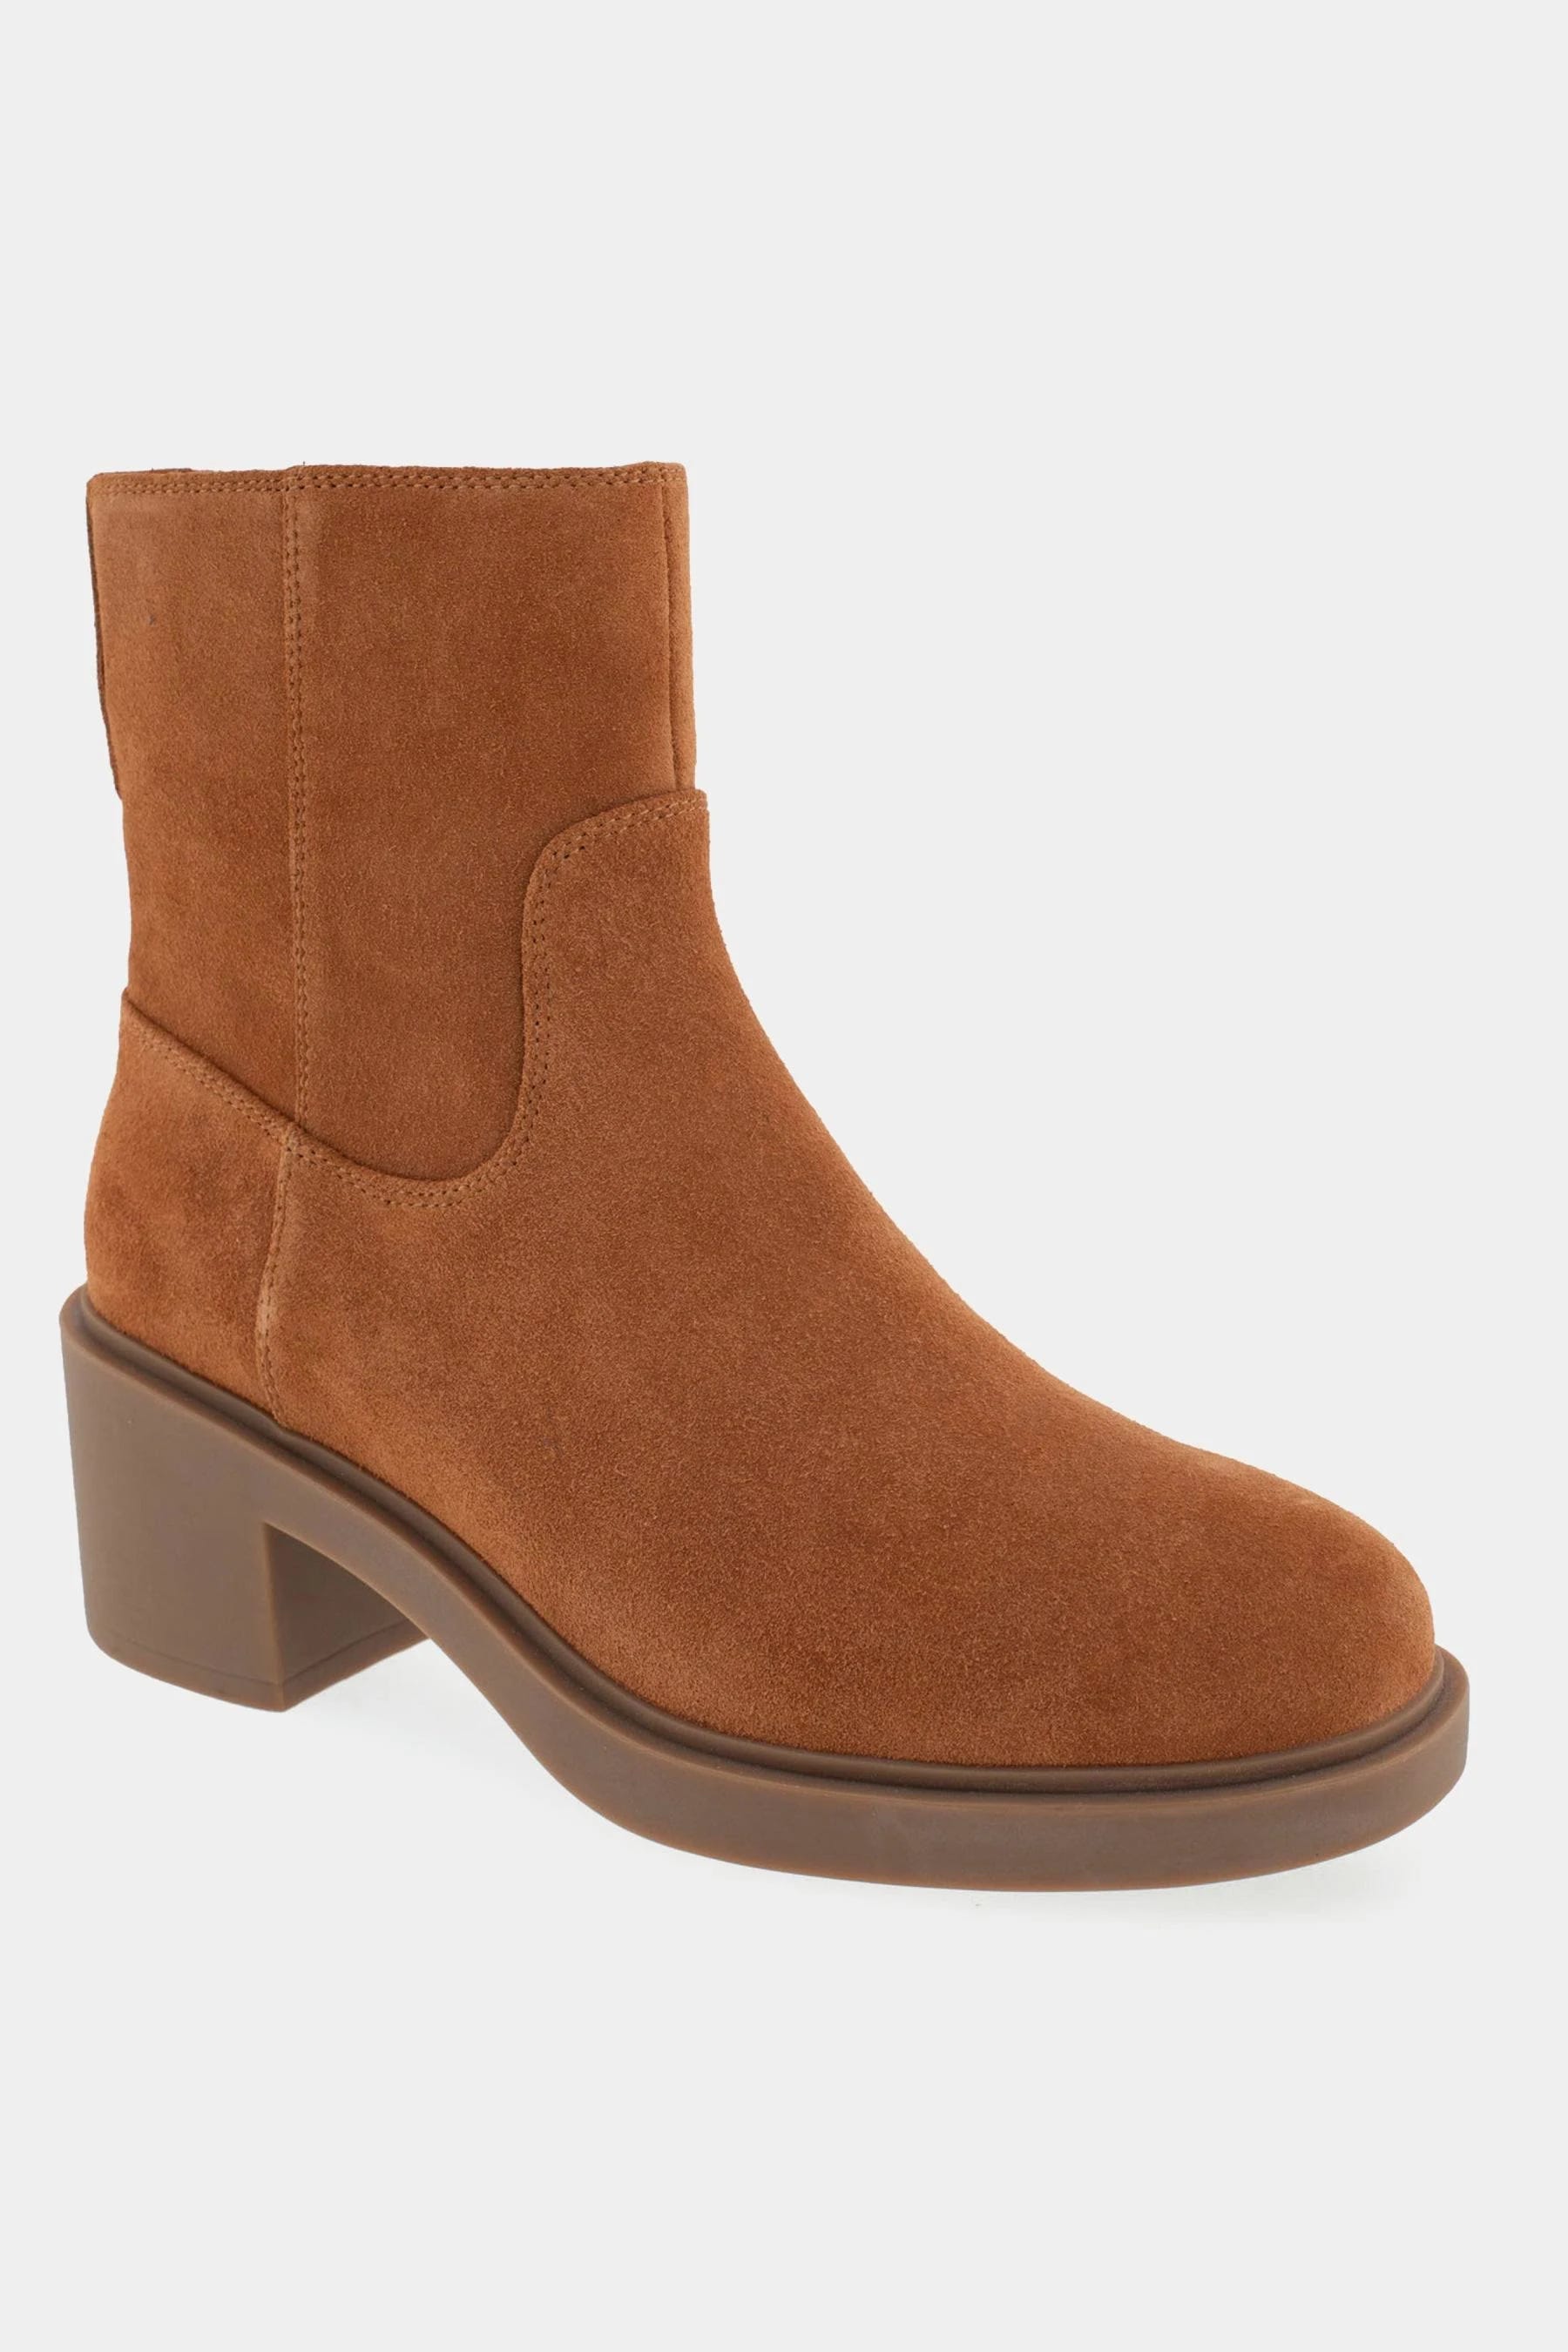 Stylish Tan Suede Booties with OrthoLite Aerofly Support | Image